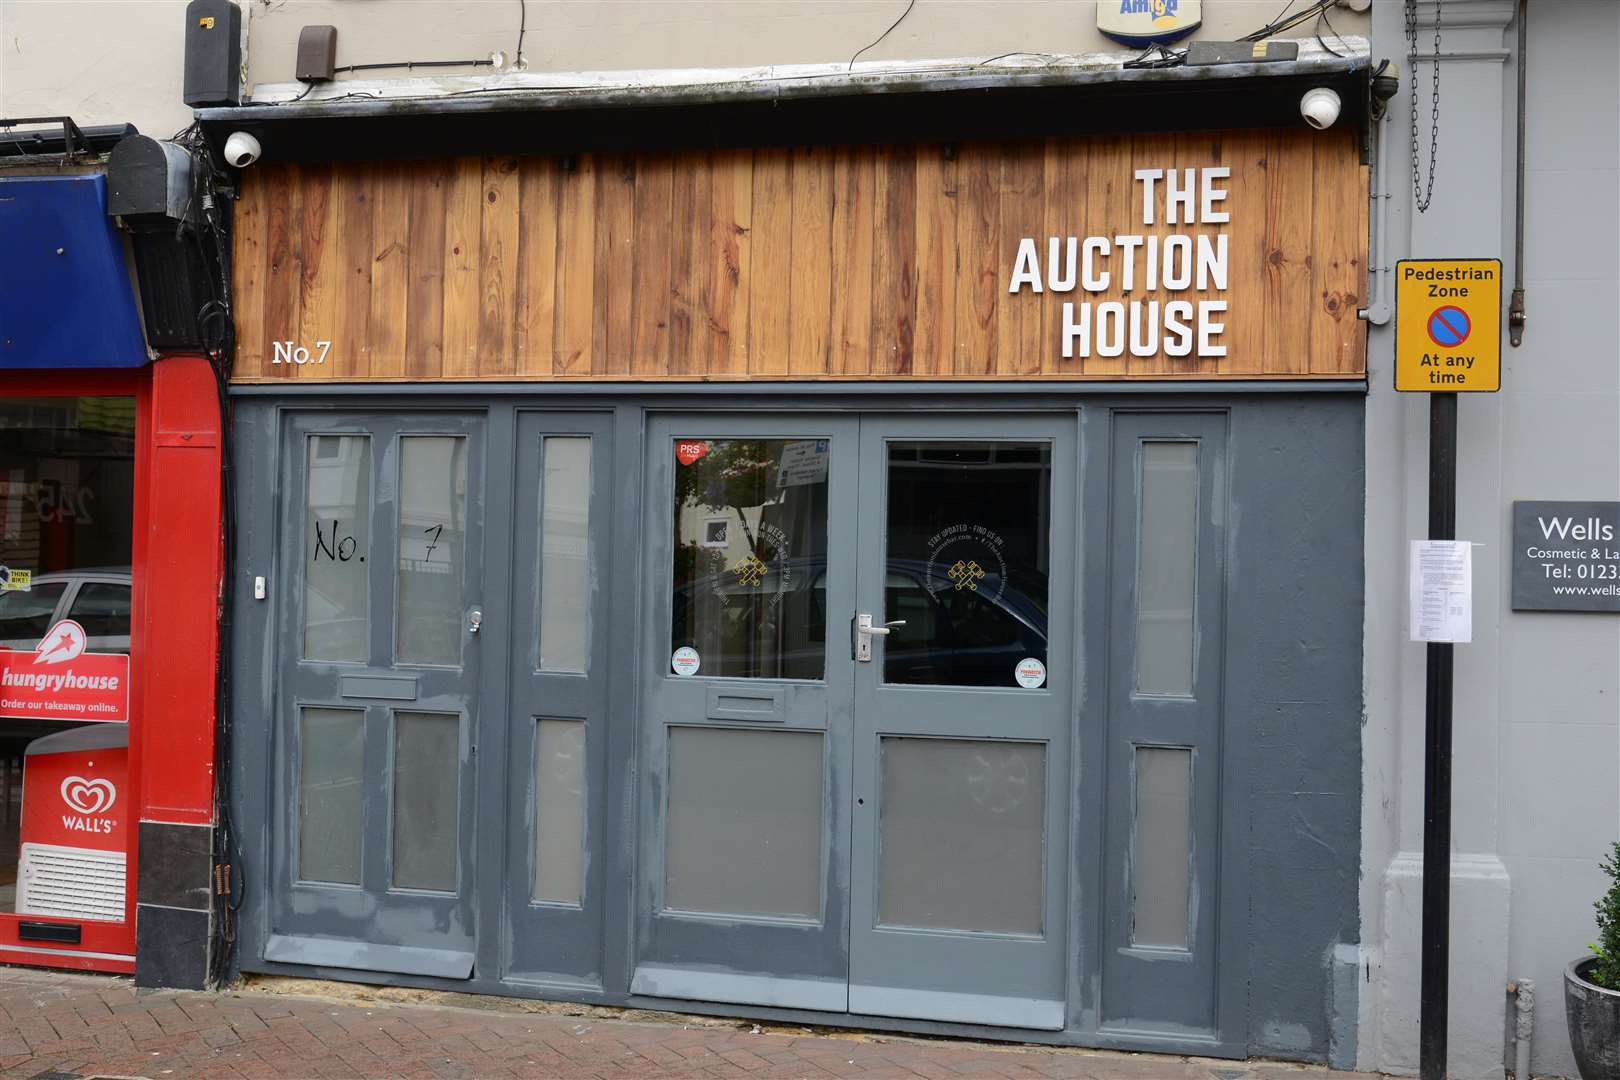 The Auction House Bar had its licence reviewed